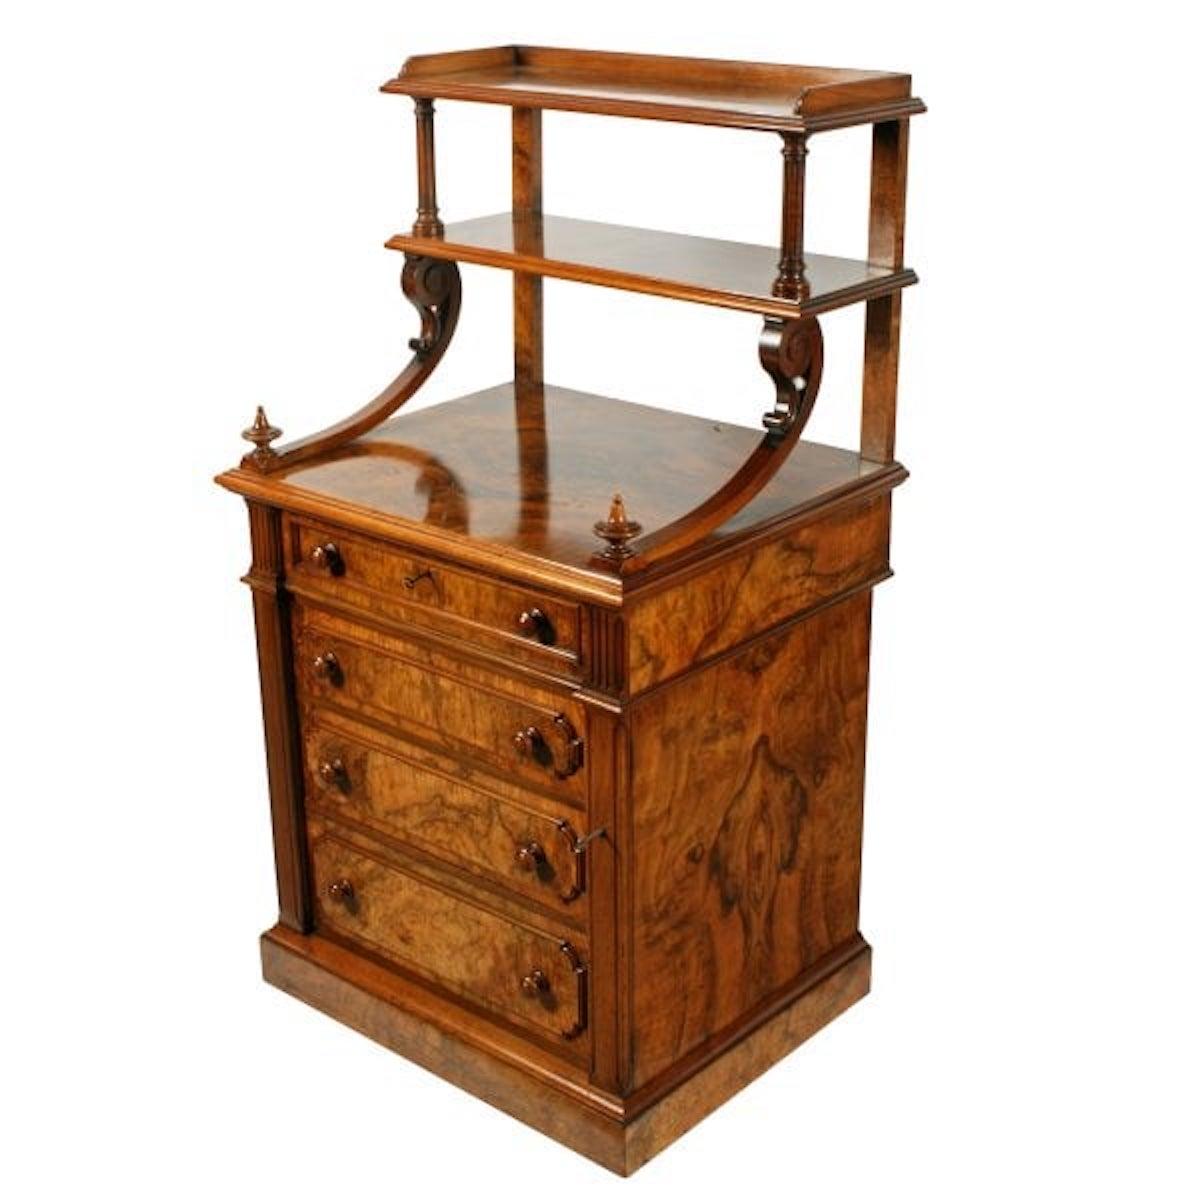 Victorian Walnut Bonheur du Jour

An unusual mid 19th century Victorian figured walnut bonheur du jour.

The bonheur du jour has four drawers to the front, the three lower drawers have a Wellington chest style locking bar to the right hand